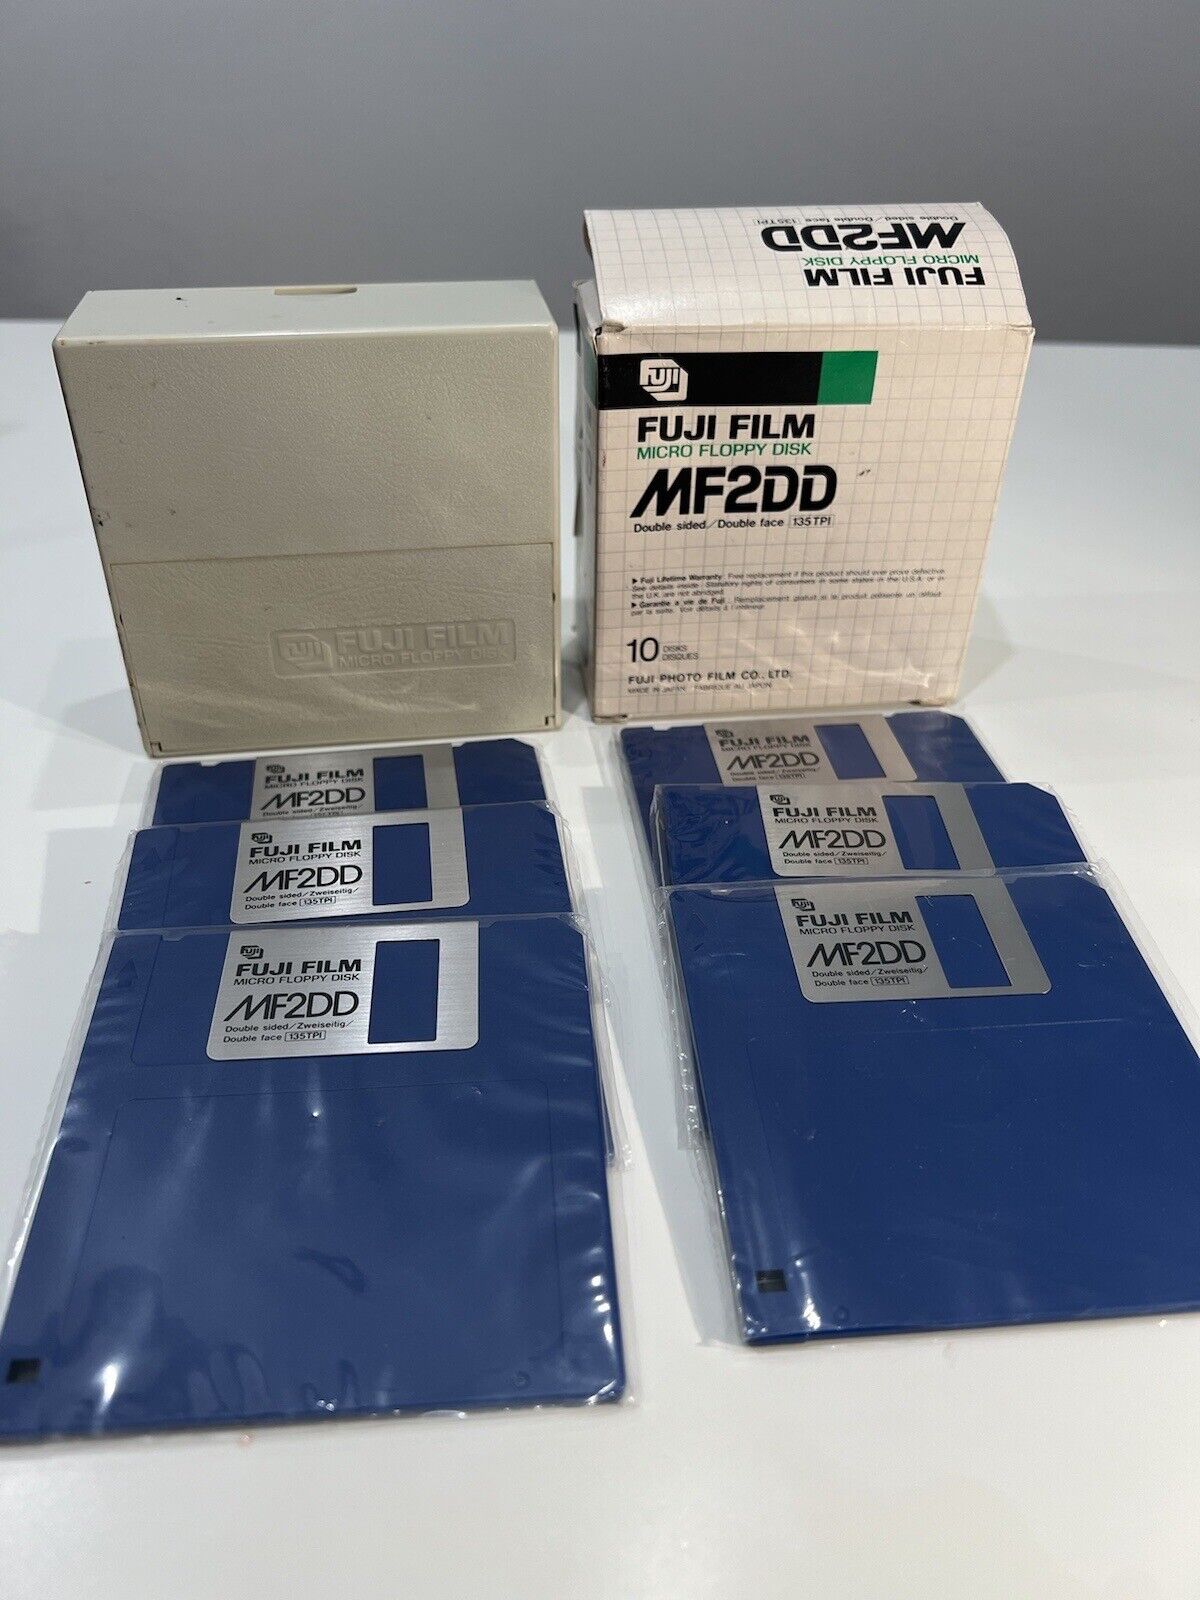 Vintage Sealed New (6) Fuji Film 3-1/2 Inch Micro Floppy Disks MF2DD With Boxes